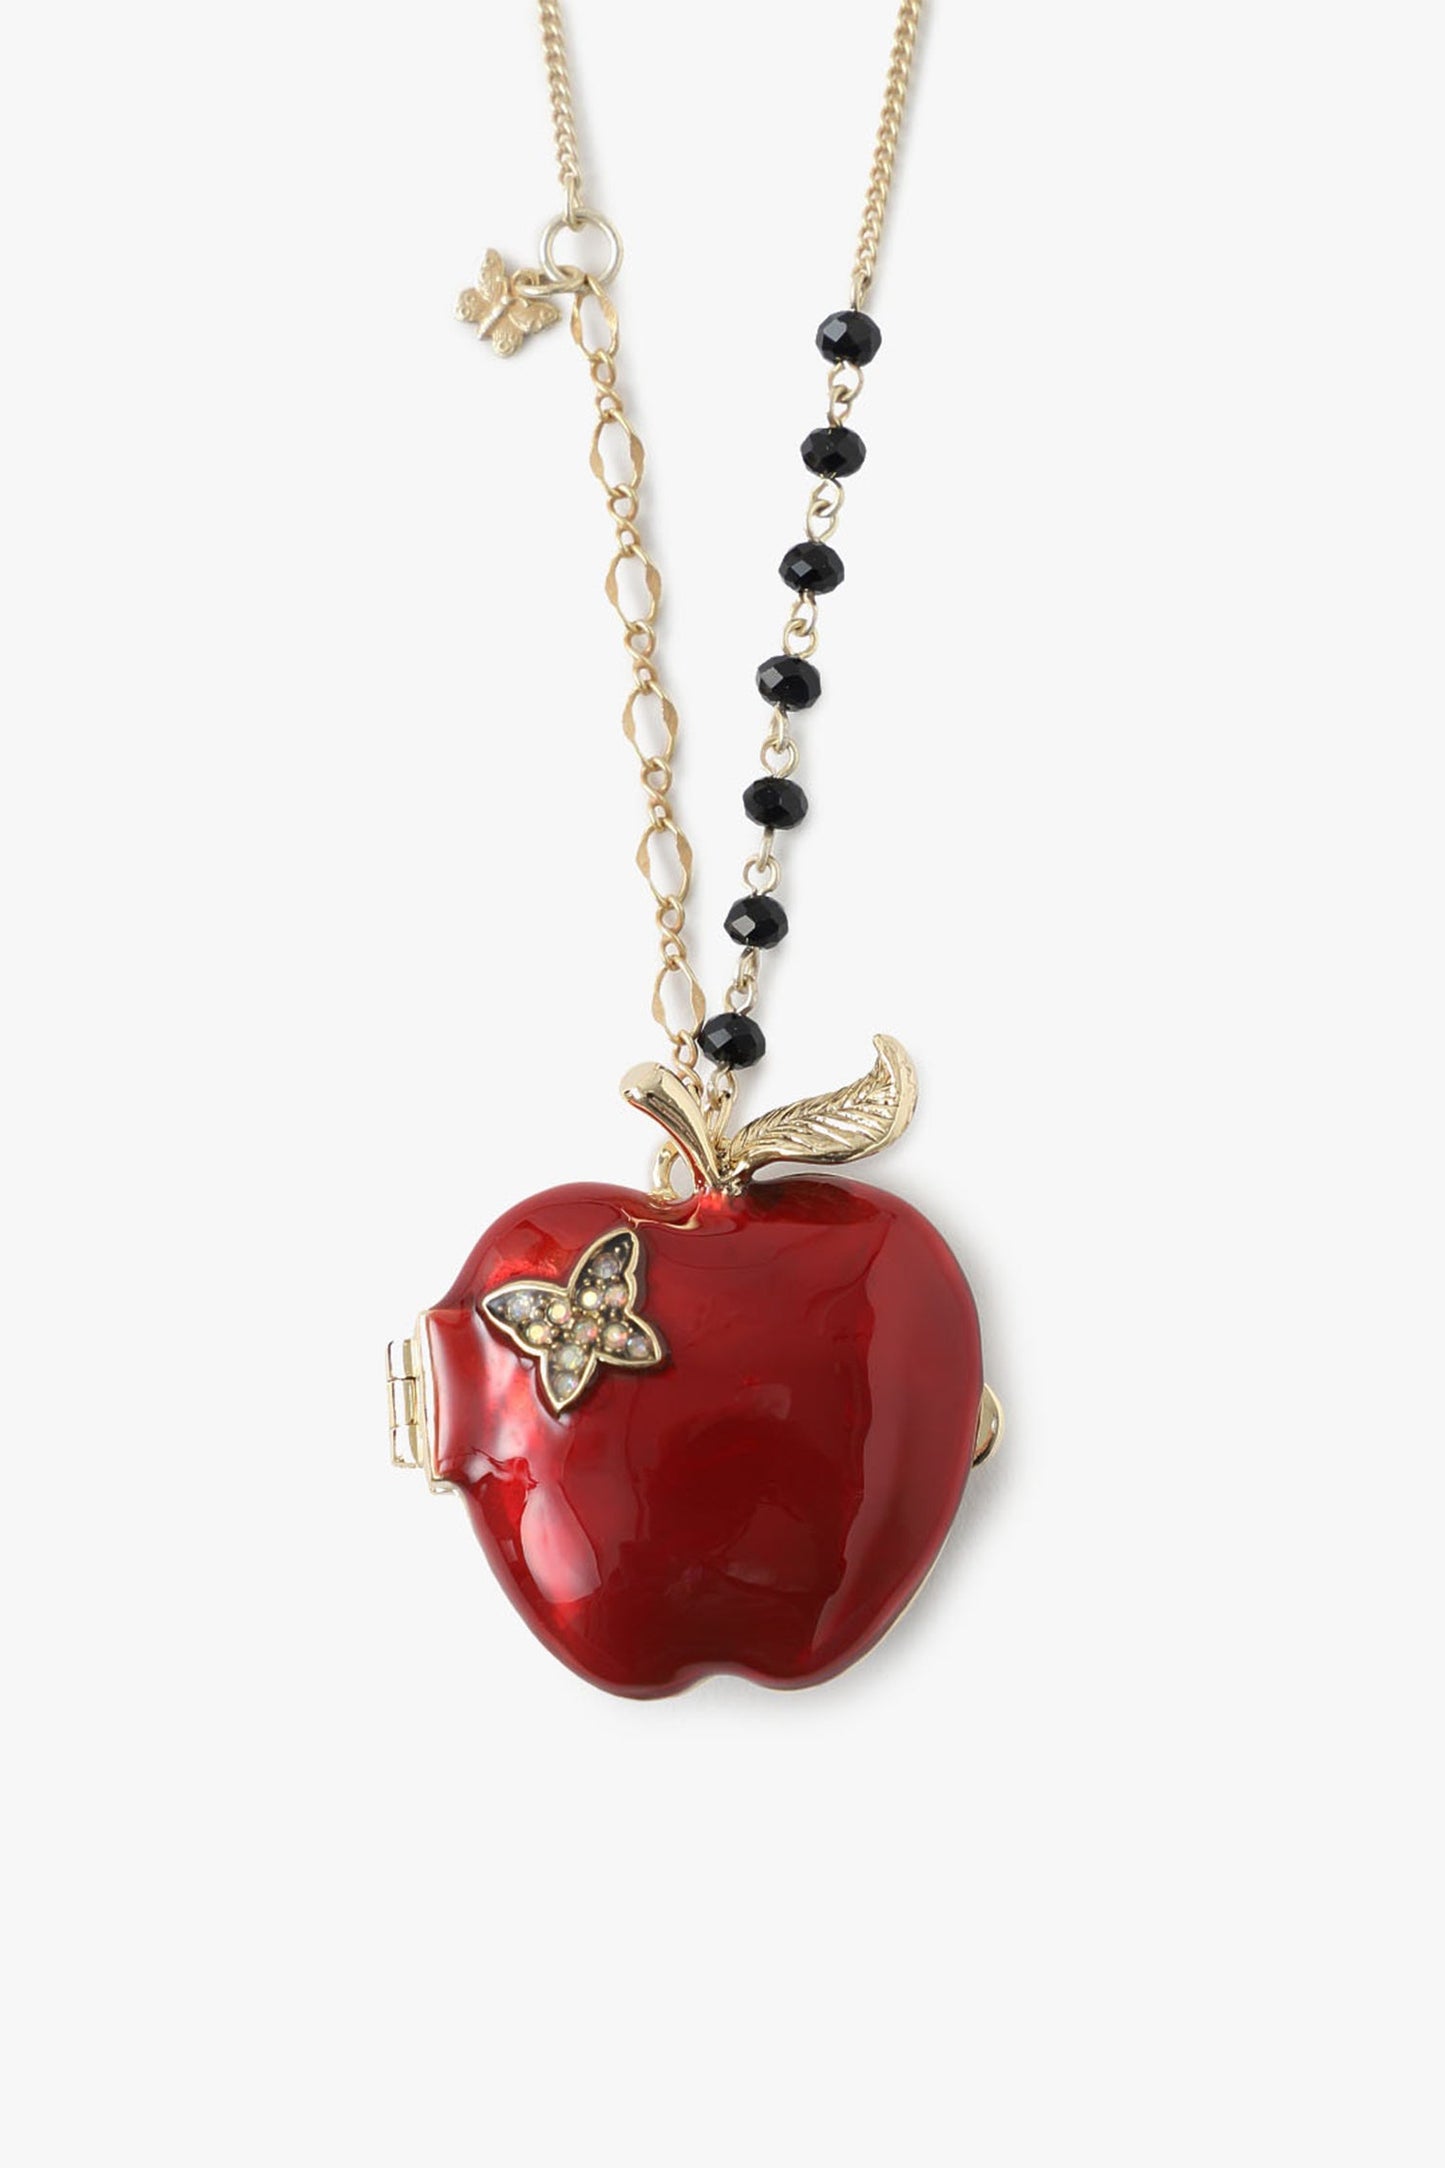 Red Apple Necklace chain, the Red apple locket is a multi-material chain and 7-black beads